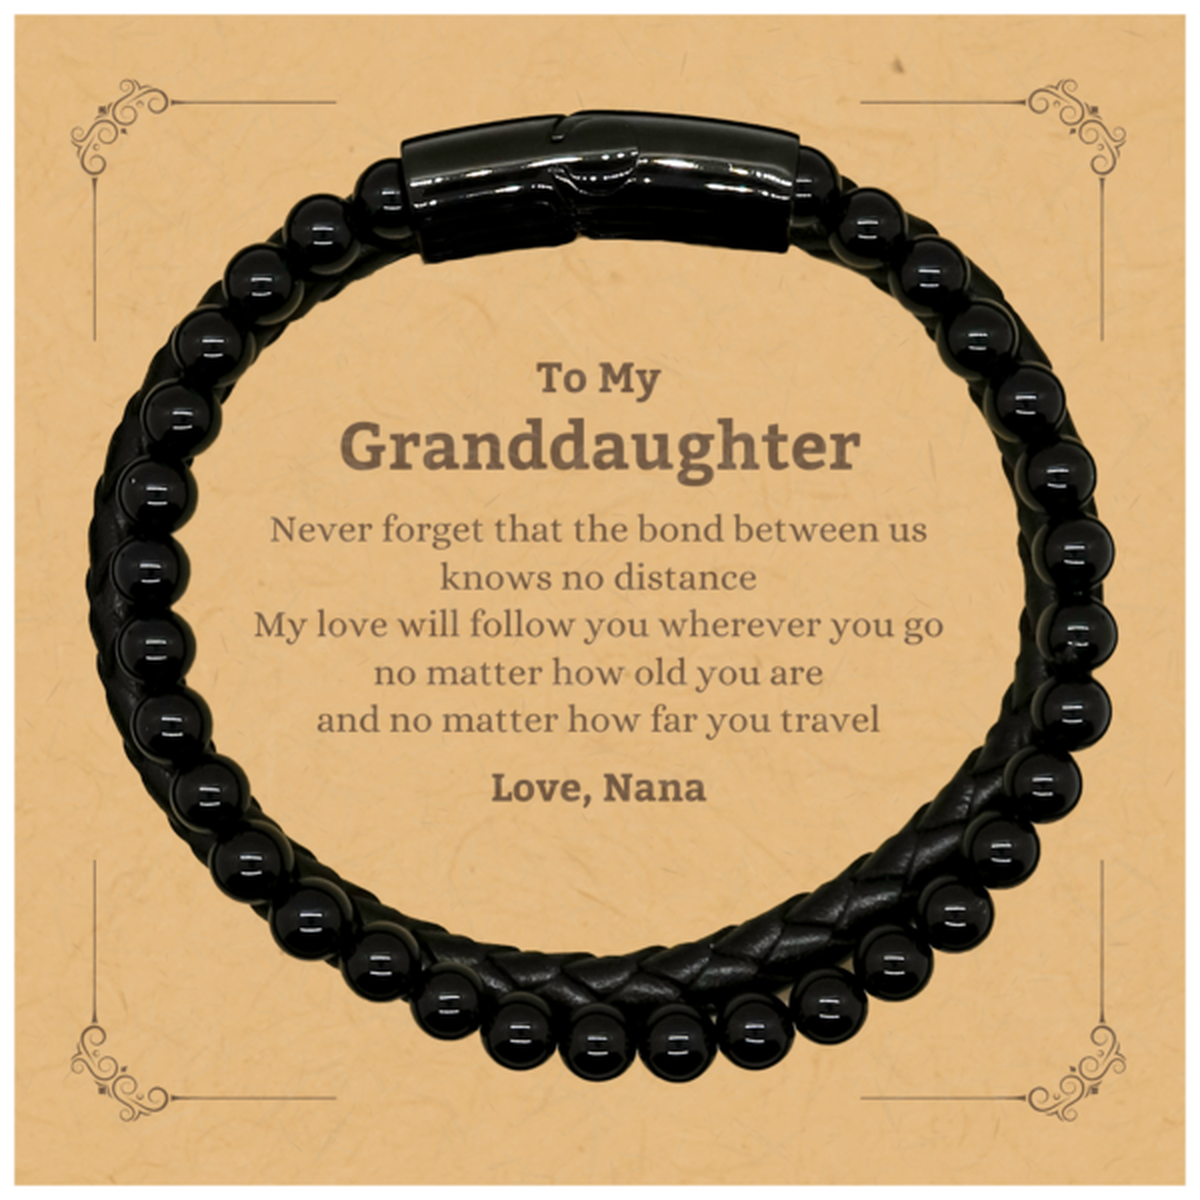 Granddaughter Birthday Gifts from Nana, Adjustable Stone Leather Bracelets for Granddaughter Christmas Graduation Unique Gifts Granddaughter Never forget that the bond between us knows no distance. Love, Nana